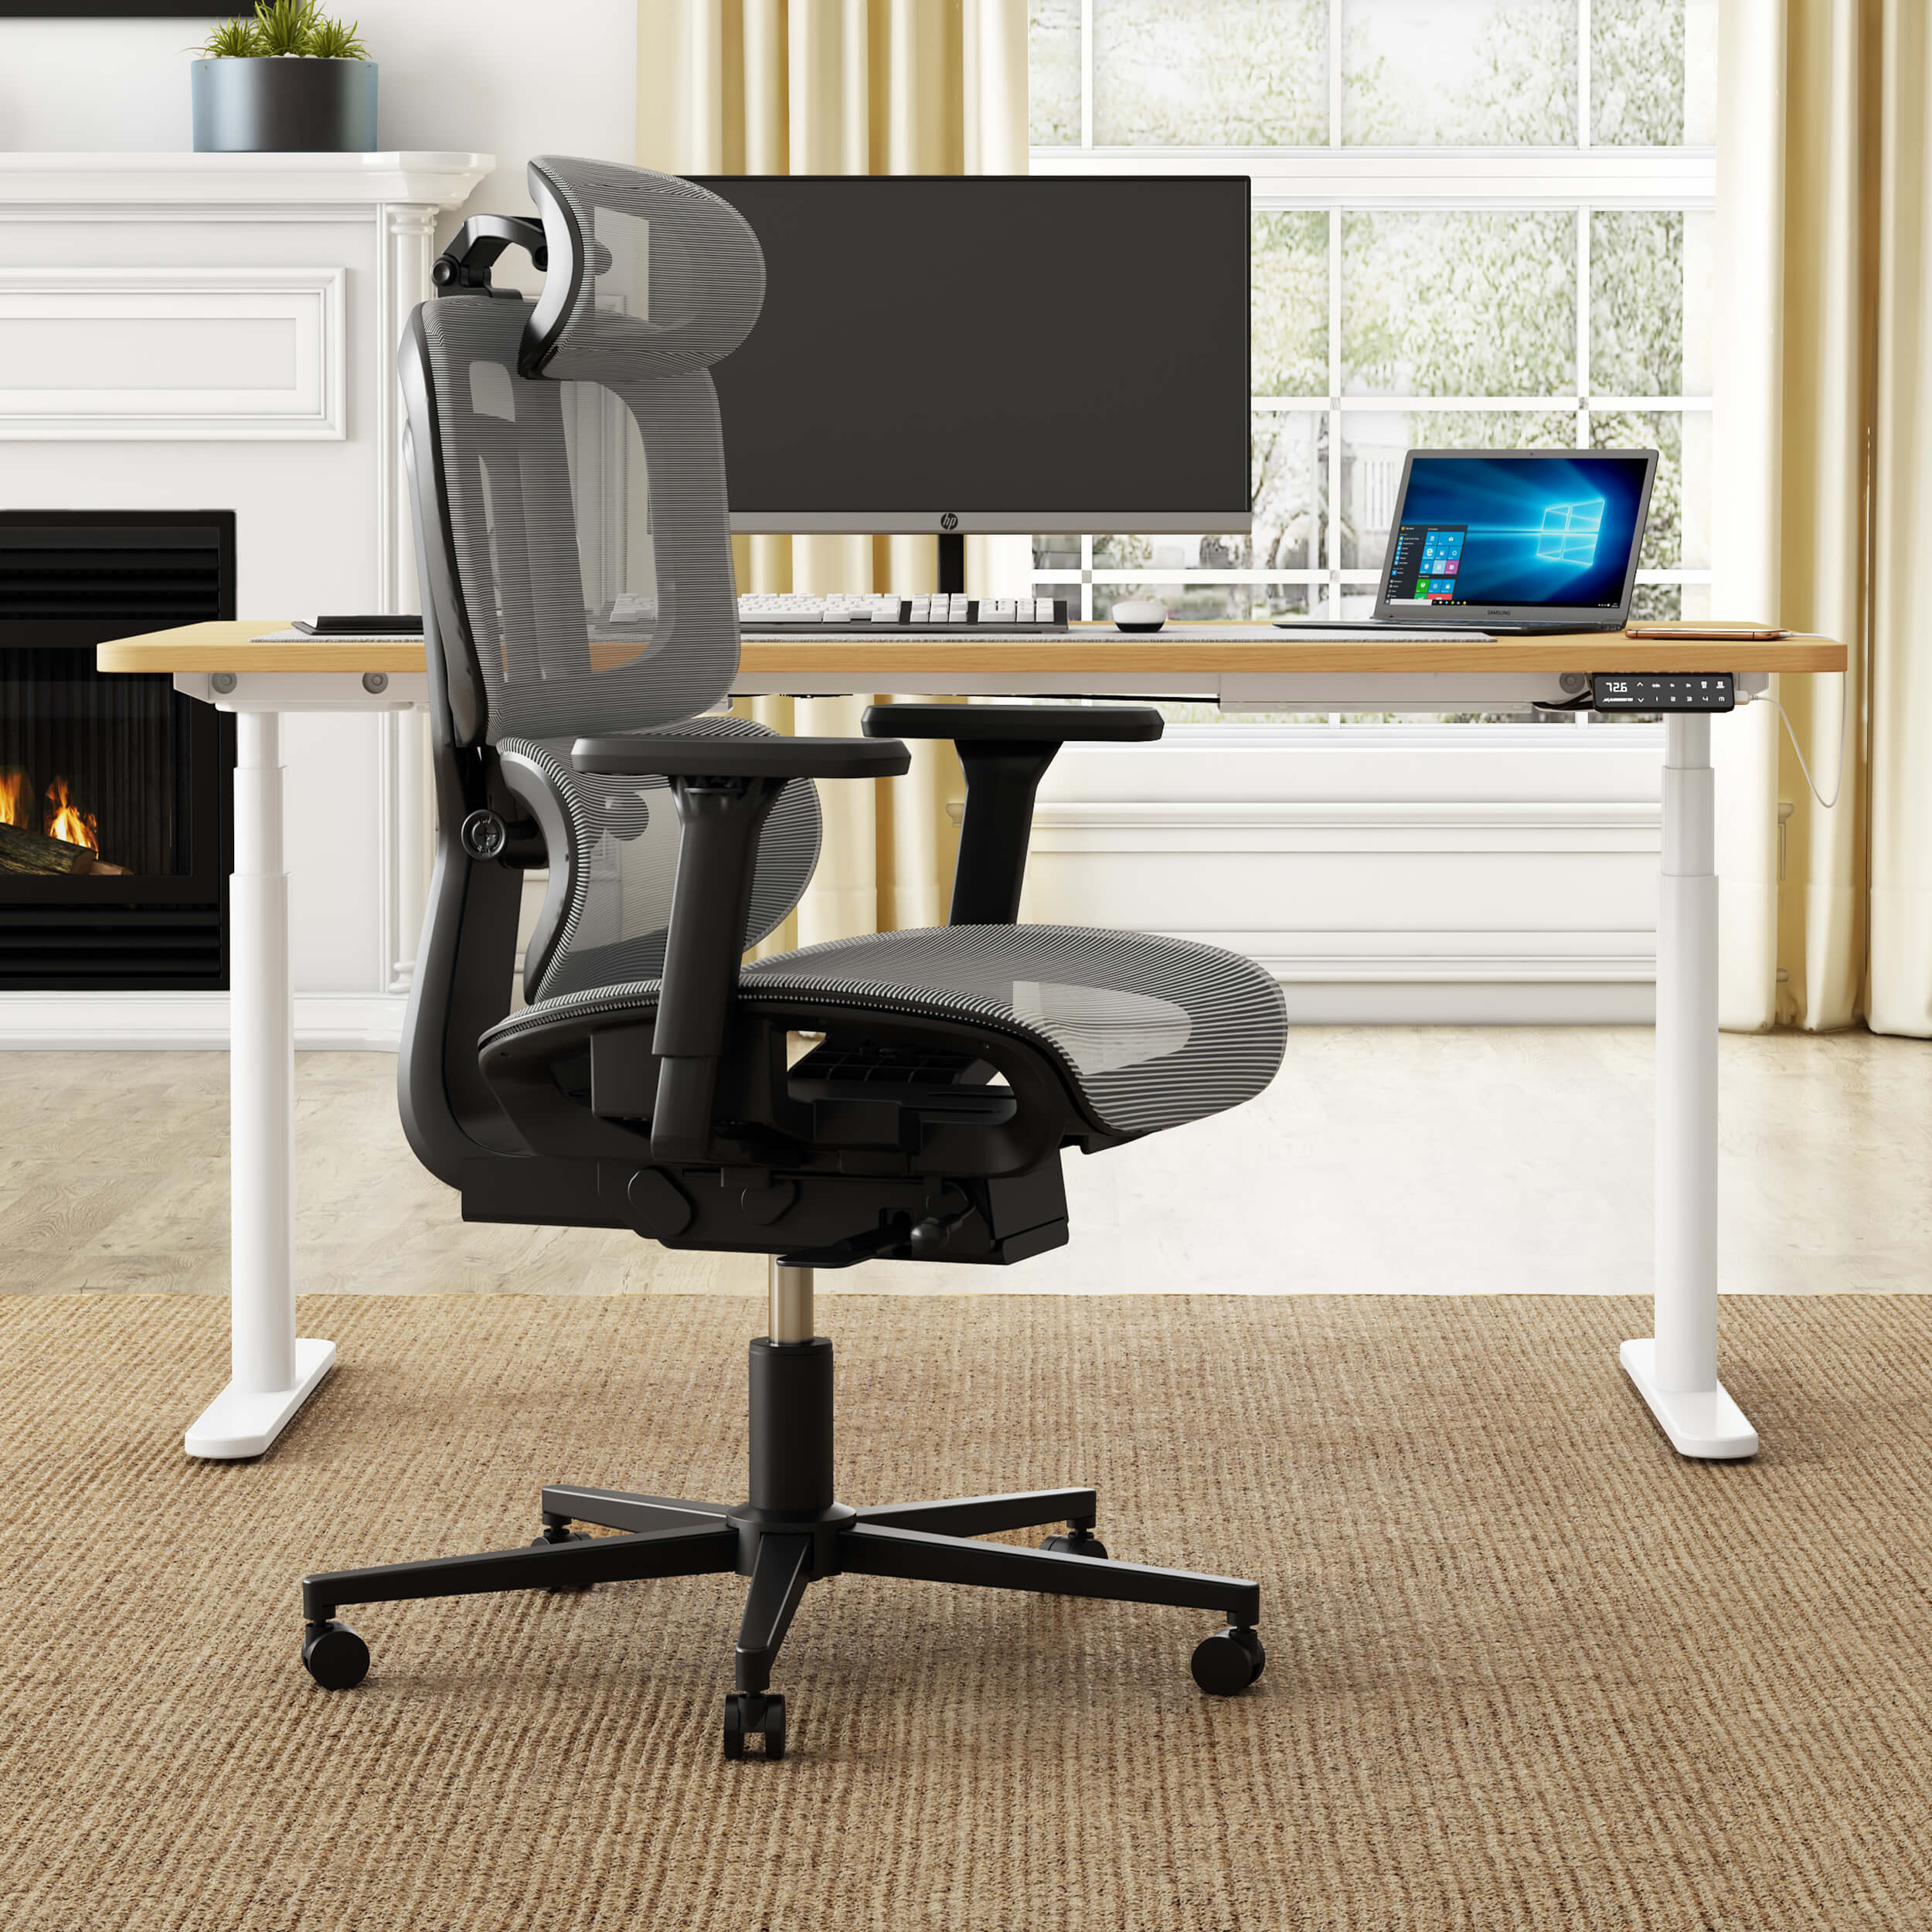 Maidesite best office chair for back pain for the home office